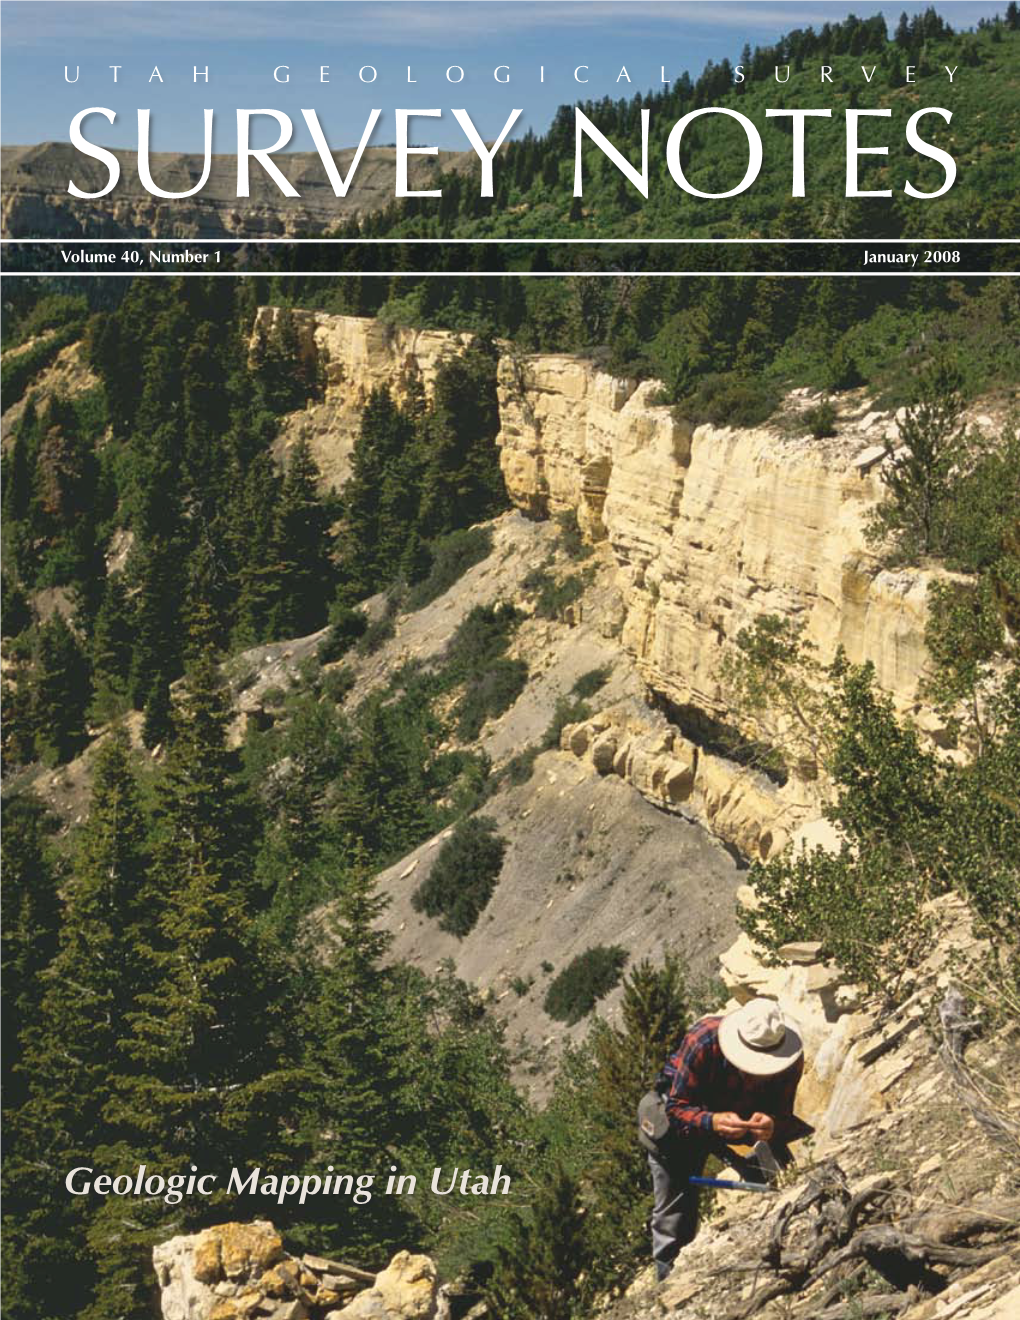 Geologic Mapping in Utah CONTENTS the DIRECTOR’S PERSPECTIVE GEOLOGIC MAPPING in UTAH